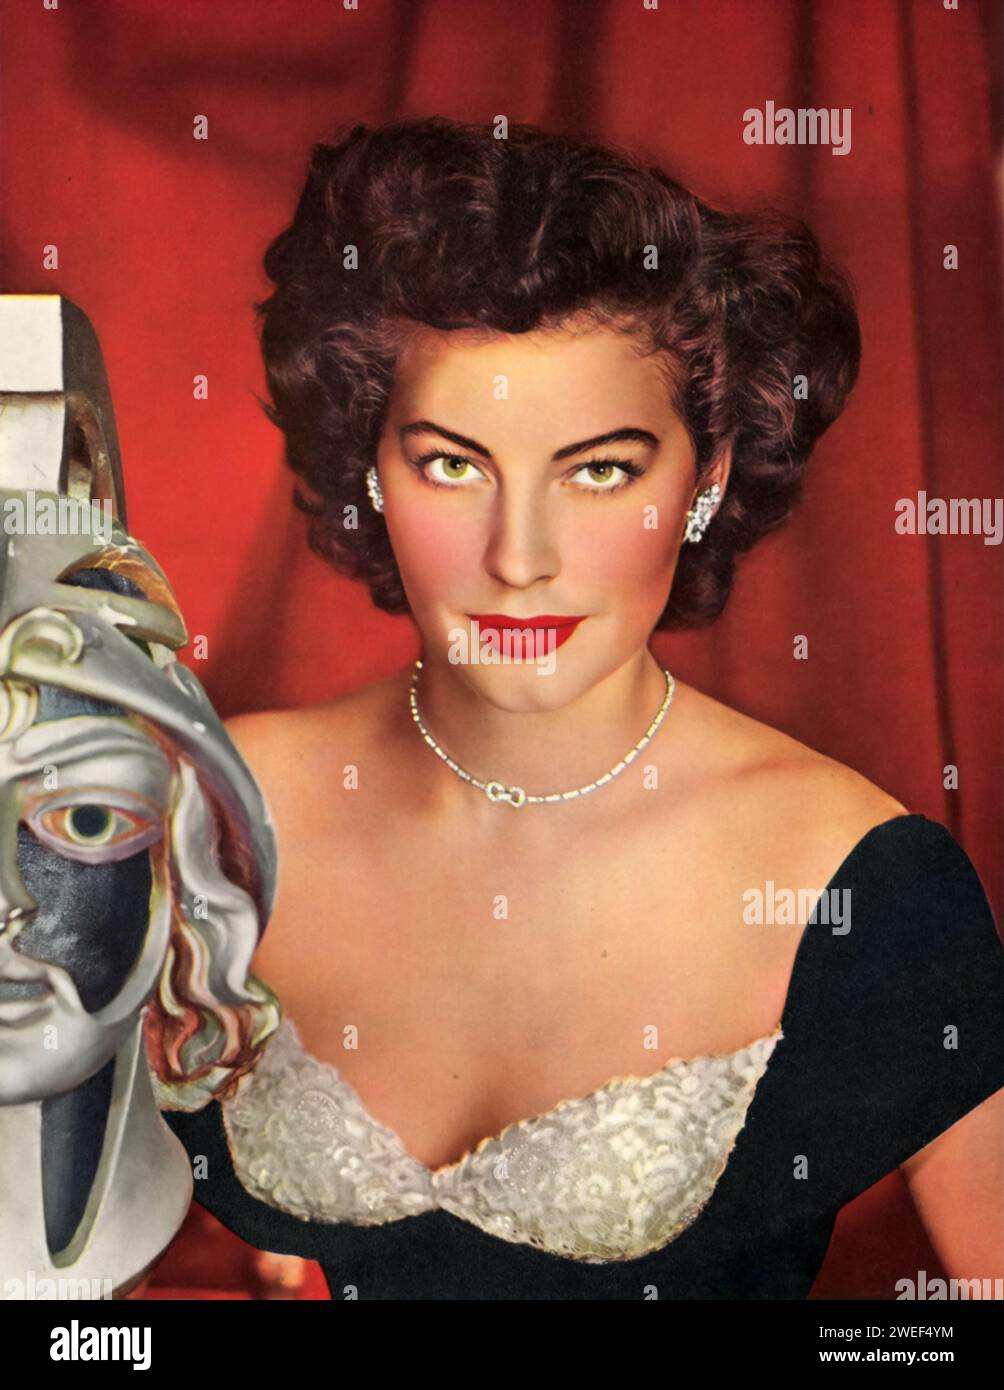 A portrait of Ava Gardner, a celebrated actress renowned for her roles in films like 'The Hucksters' (1947), often referred to as 'Carriage Entrance.' Gardner, known for her stunning beauty and compelling screen presence, brought depth and sophistication to her characters. In 'The Hucksters,' Gardner plays a nightclub singer involved with a war veteran turned advertising executive. Stock Photo